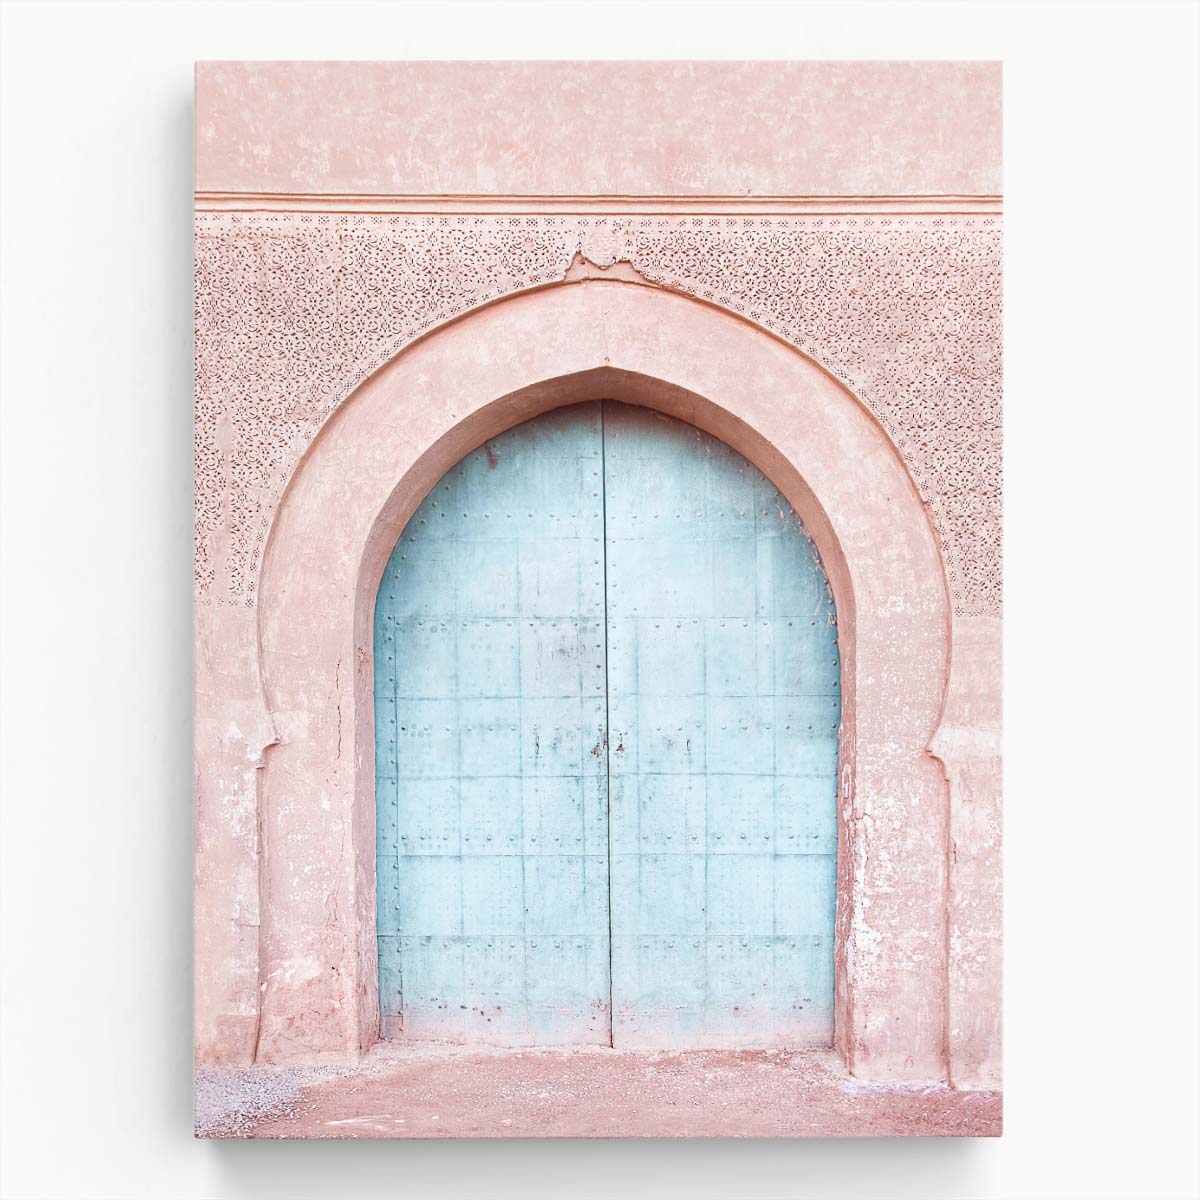 Turquoise Moroccan Door Photography Architecture & Cityscape Wall Art by Luxuriance Designs, made in USA